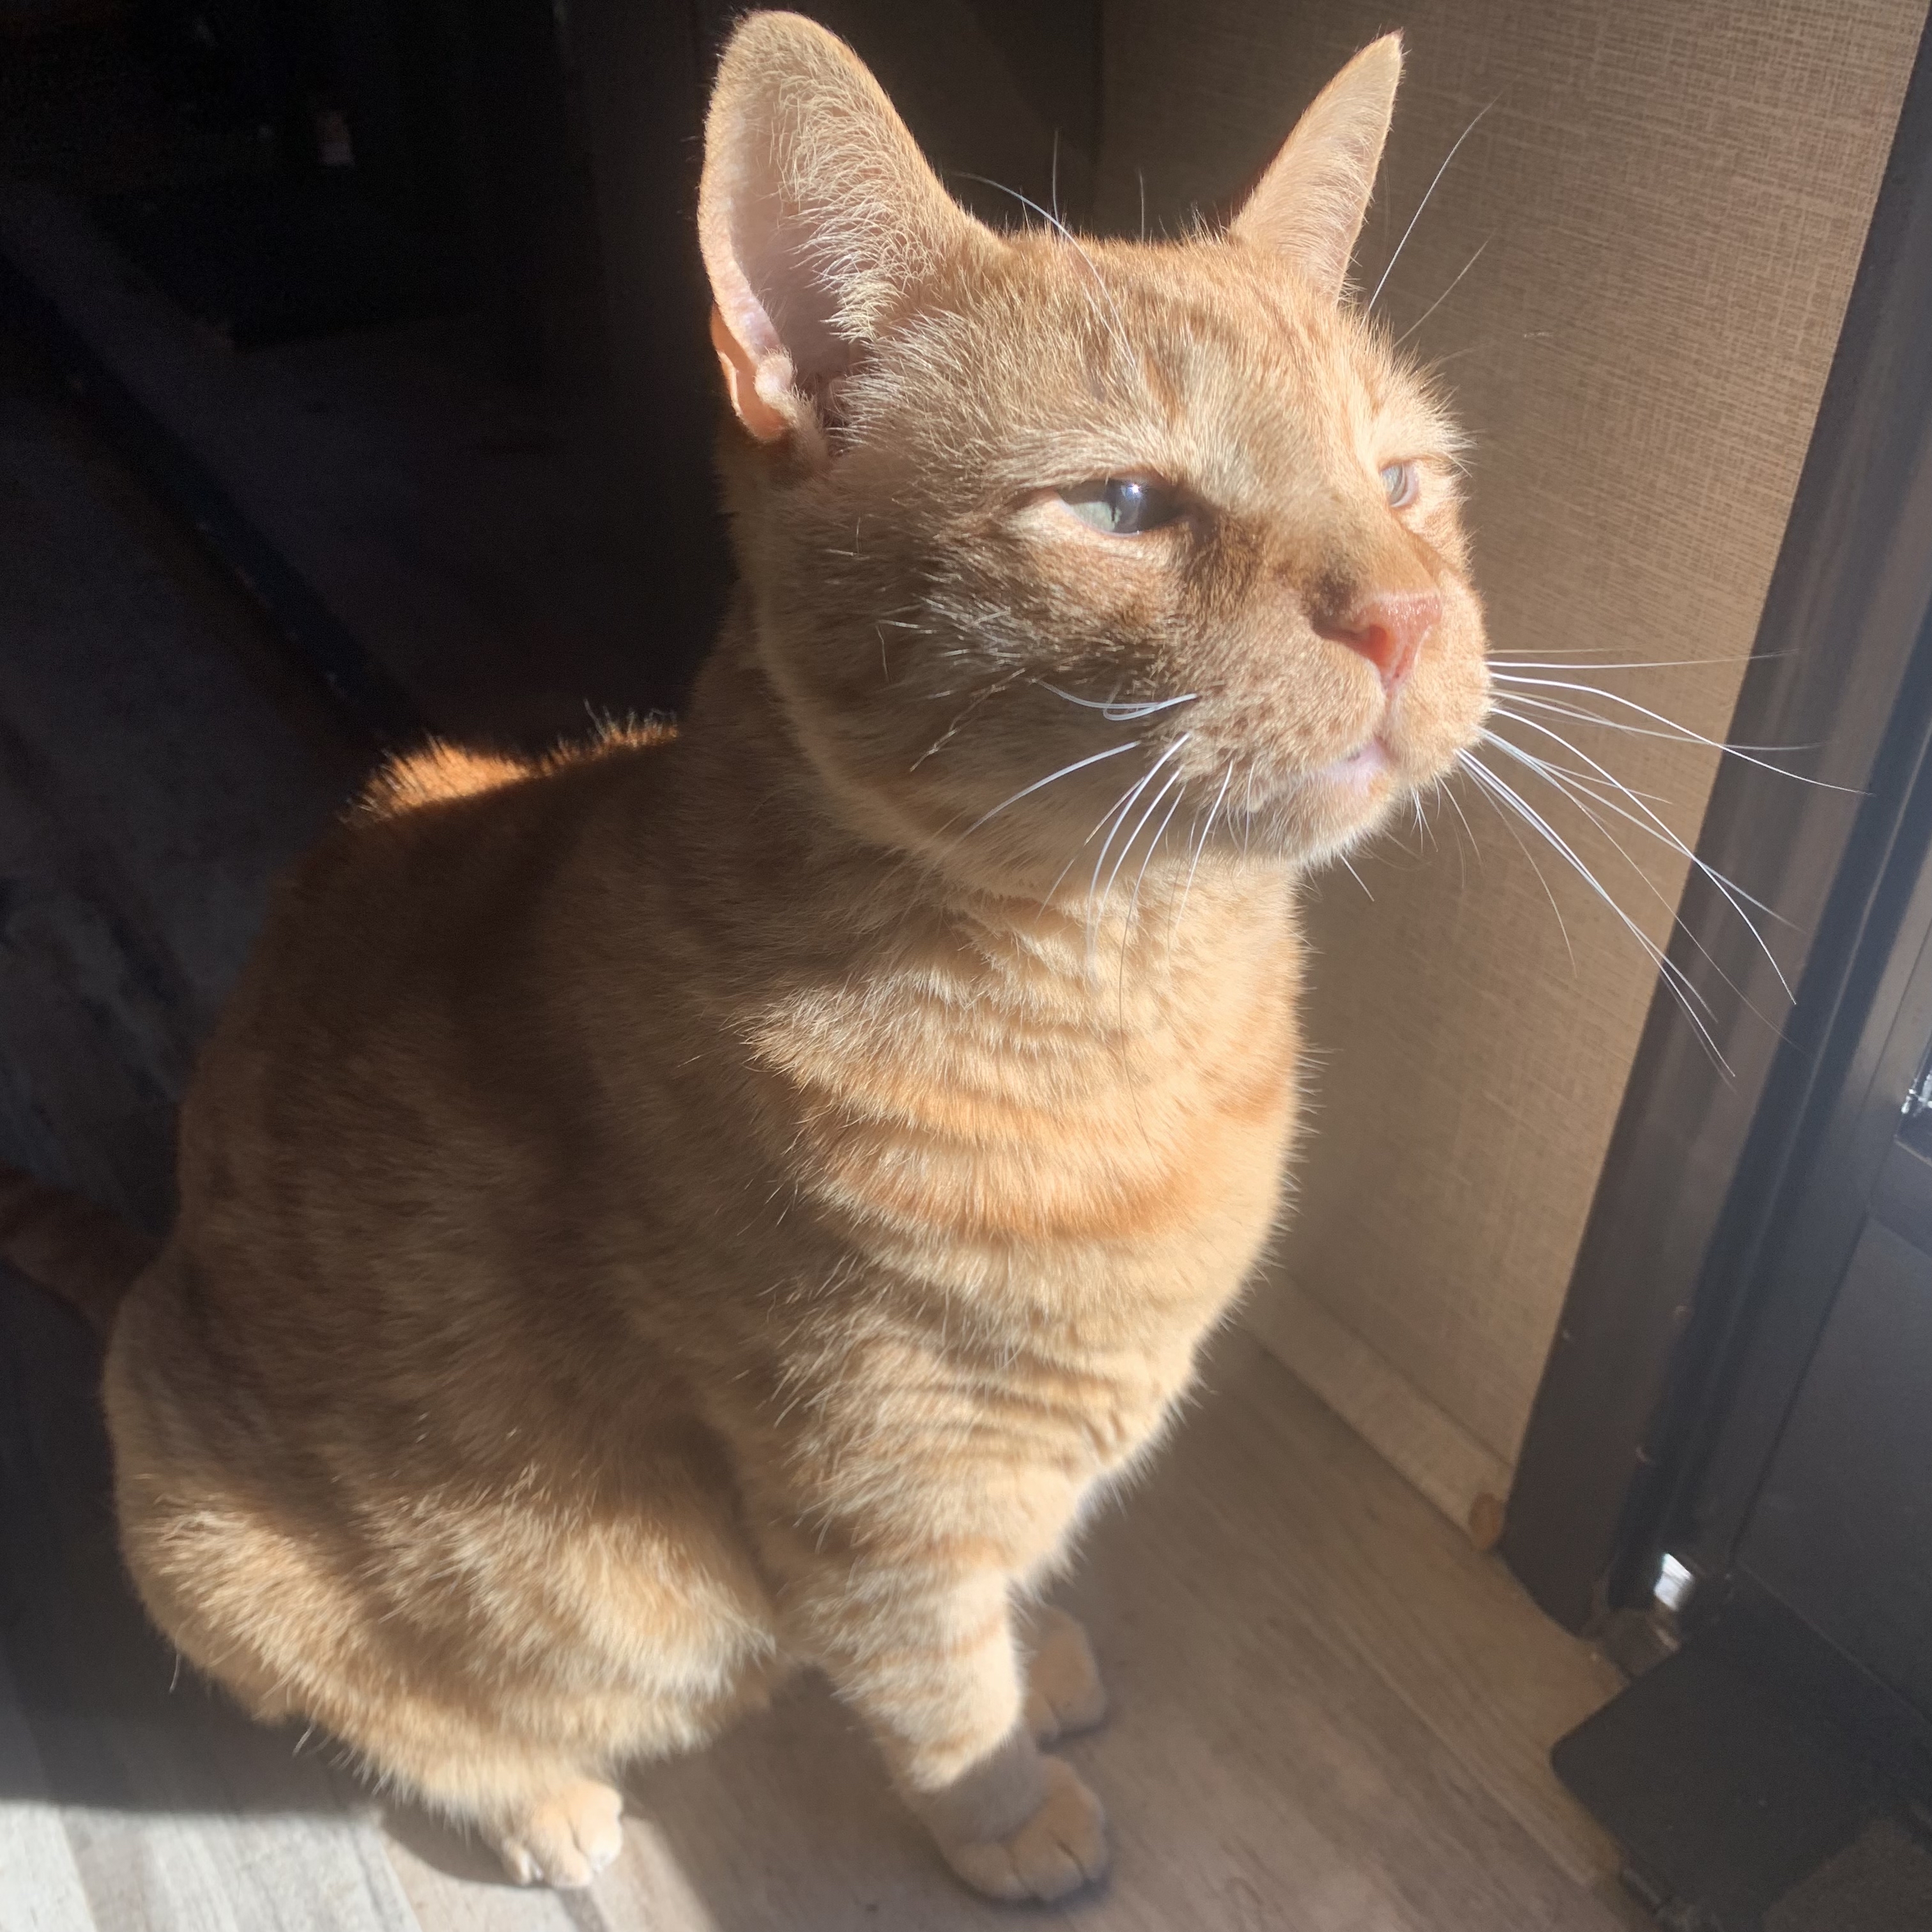 a picture of stanley sitting by a door enjoying a sun ray. he has his eyes slightly open and he is looking off to the side